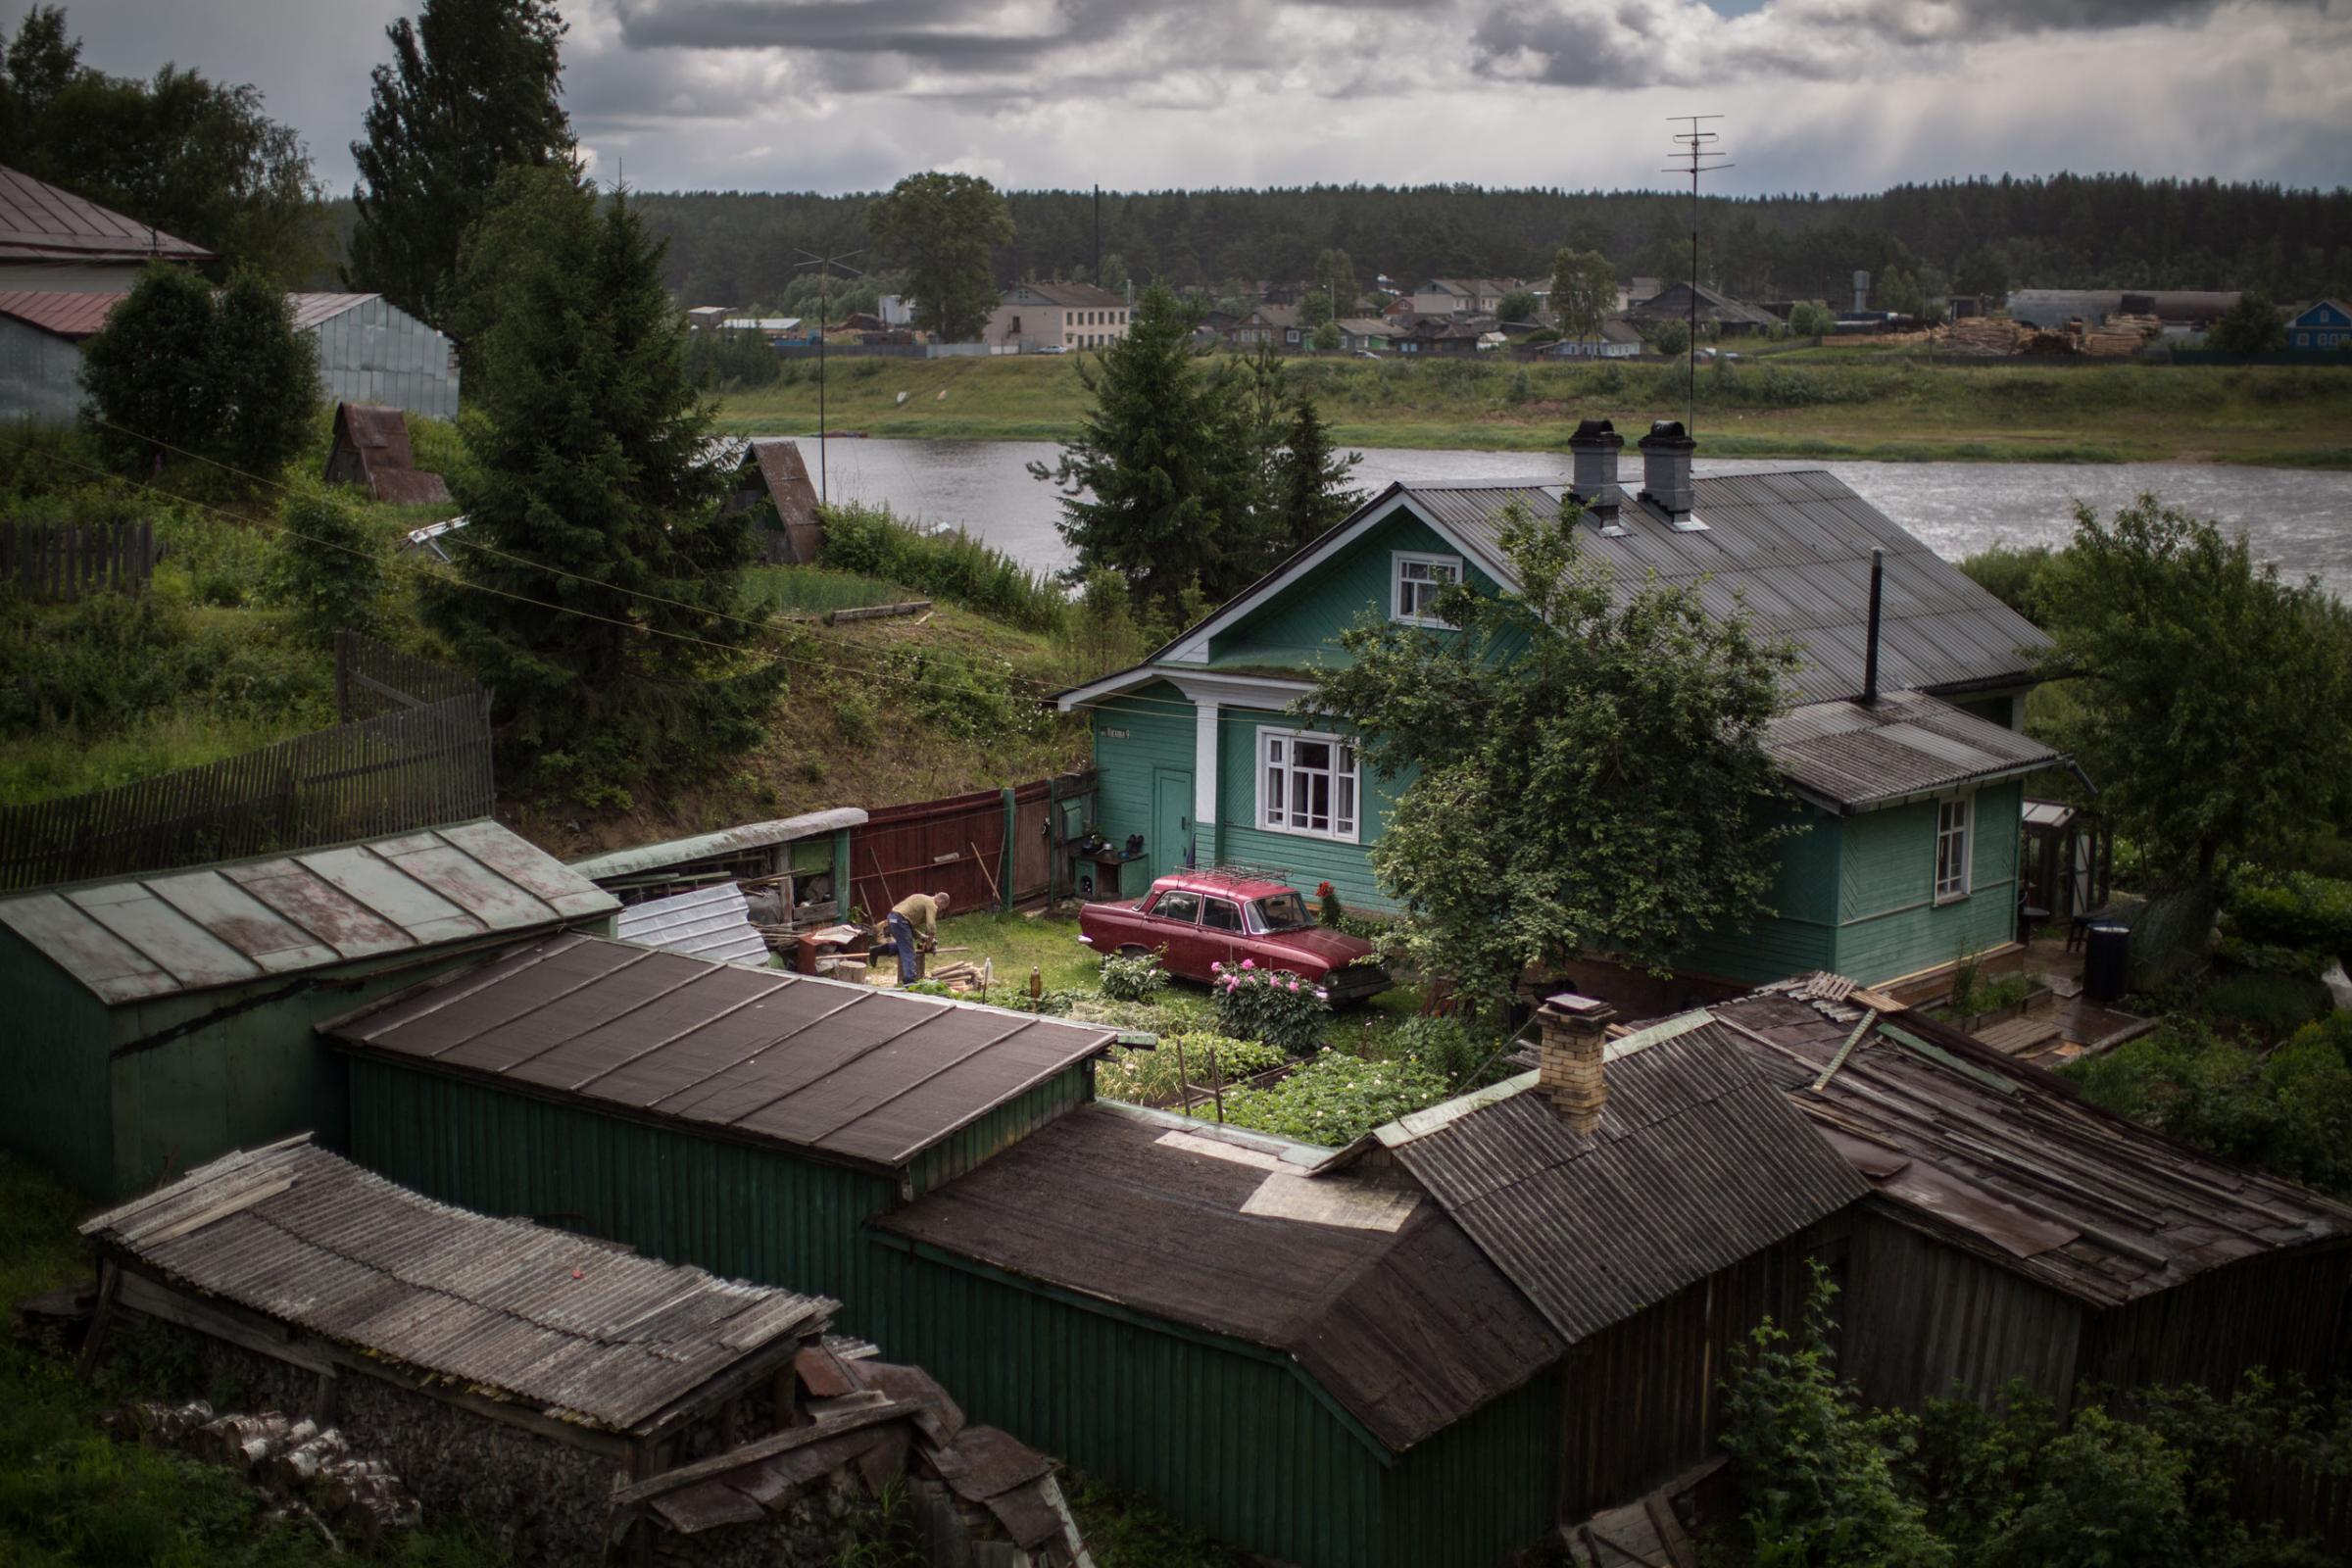 A local man works in a garden of his private house on the bank of Sukhona River in the town of Totma, the administrative center of Totemsky District in Vologda Oblast, Russia.